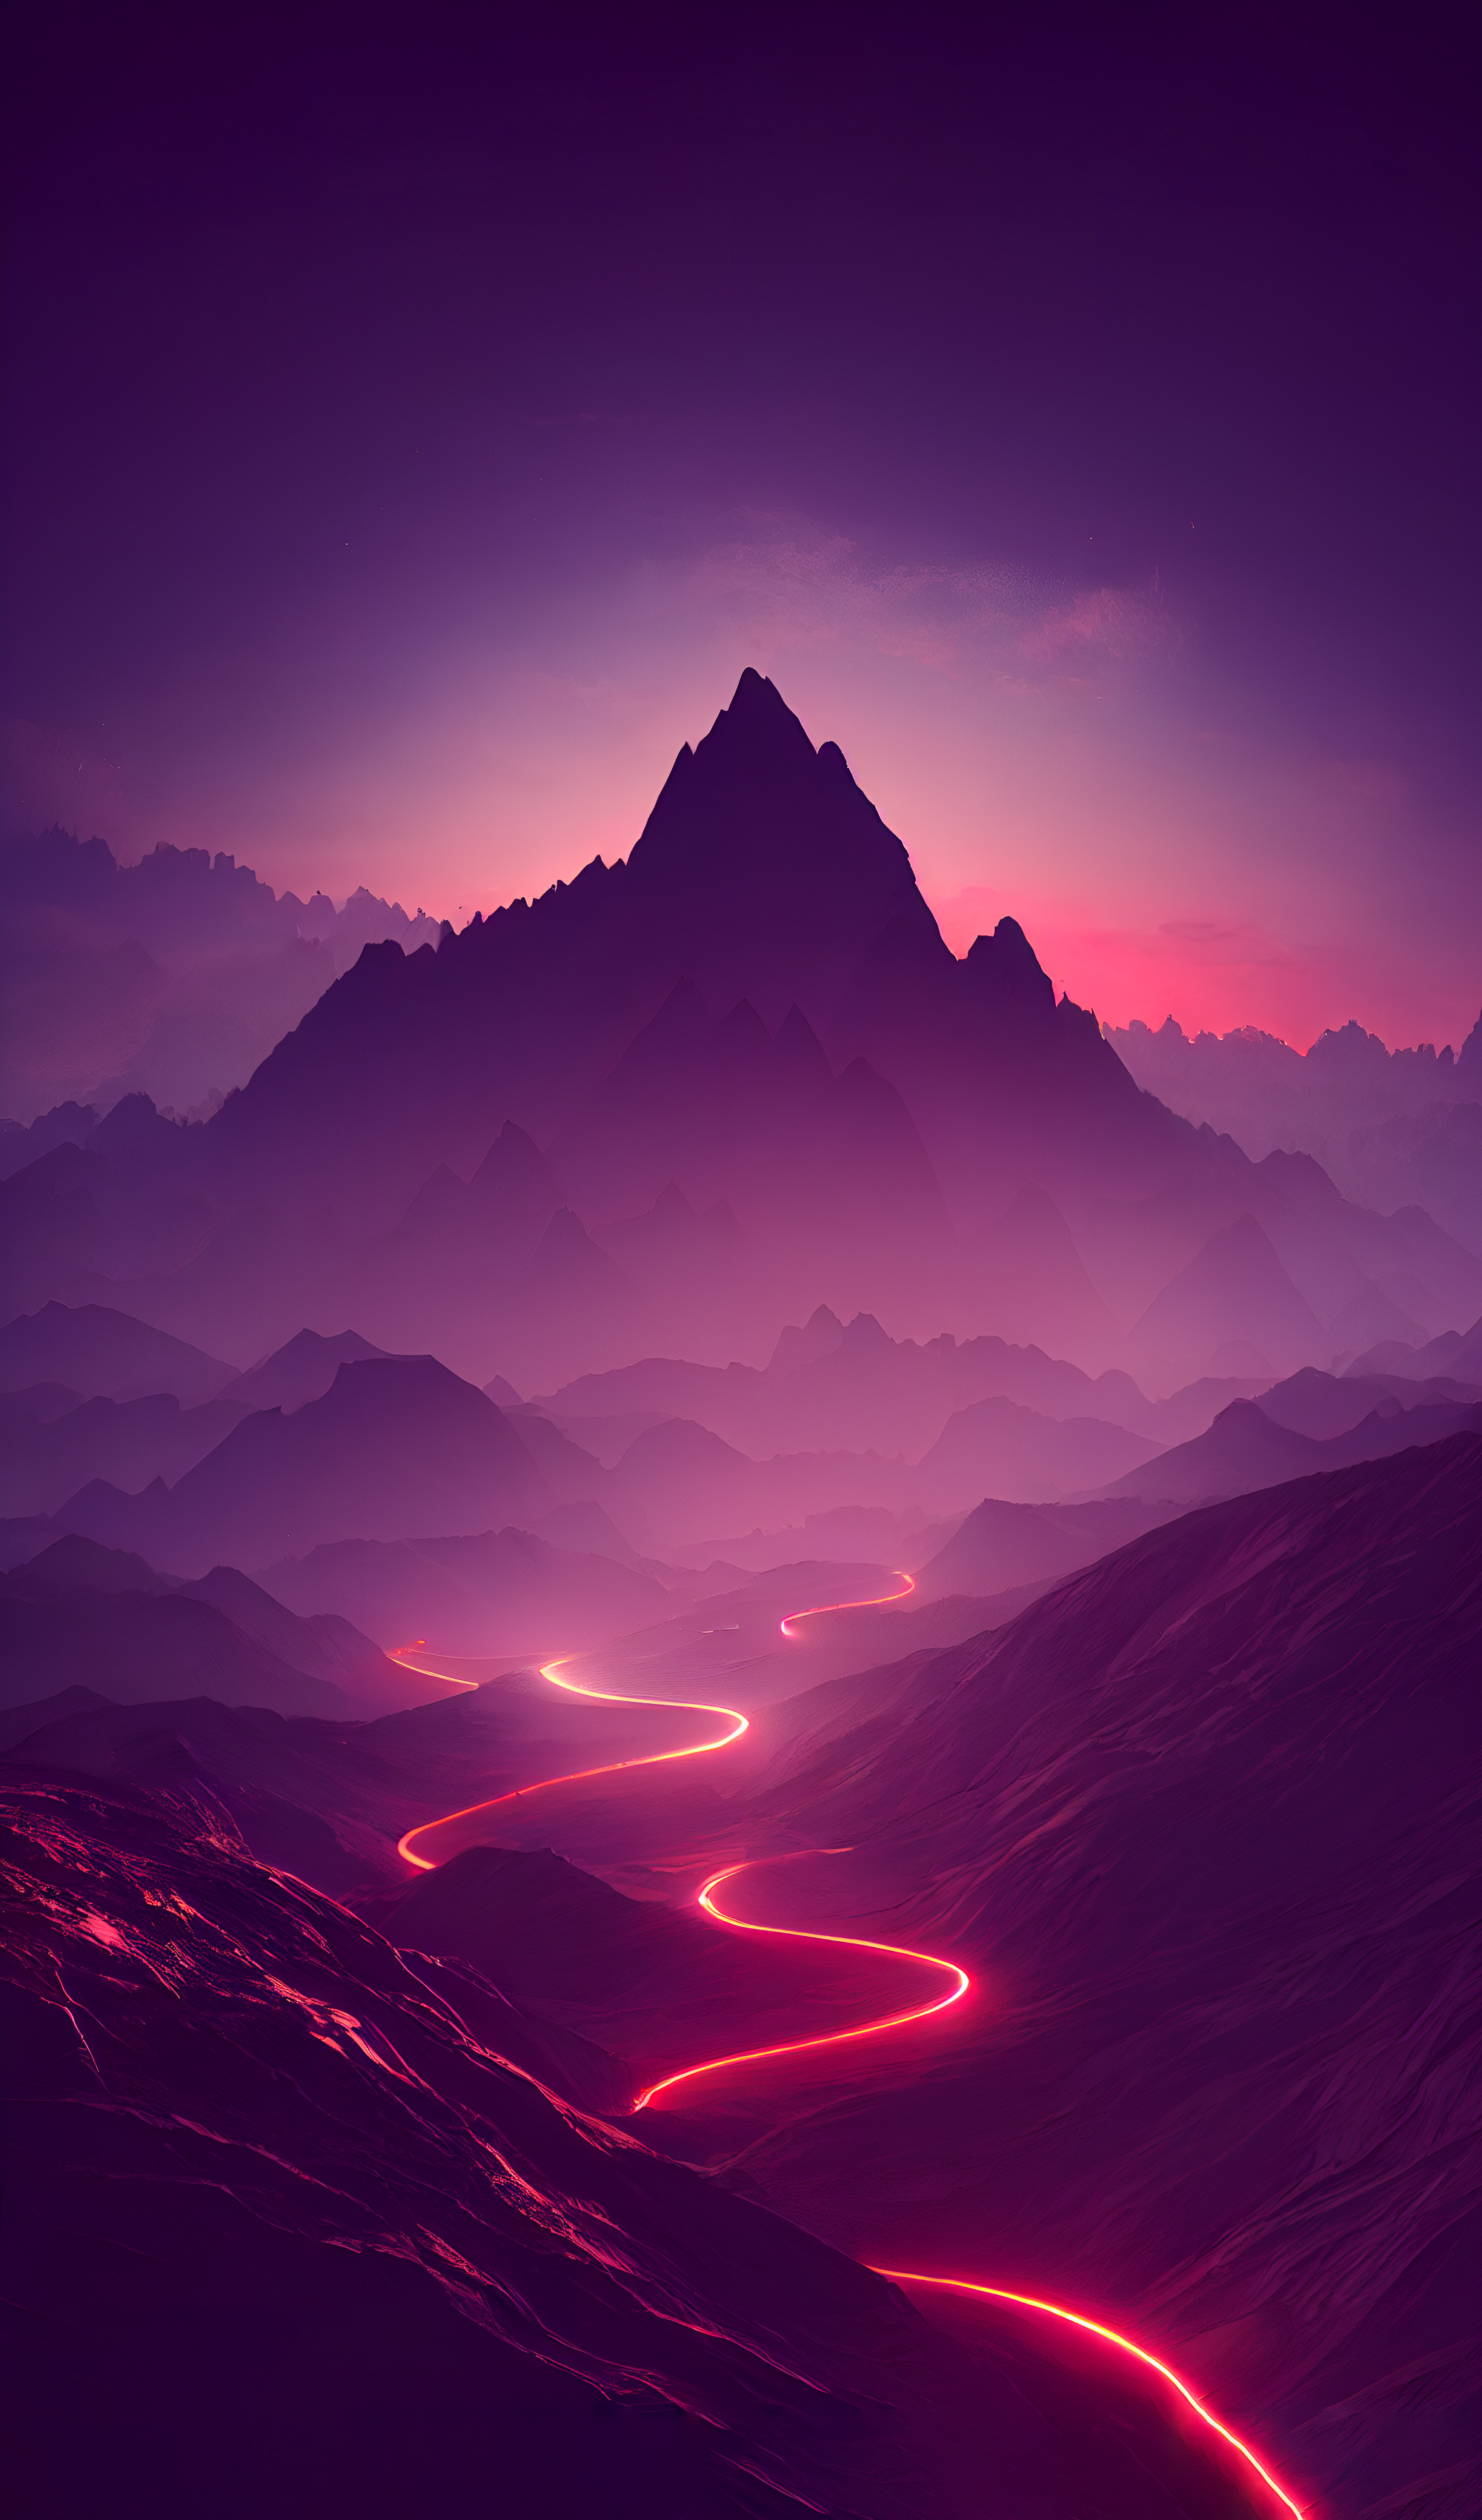 Download wallpaper 1350x2400 mountains peaks dusk purple iphone  876s6 for parallax hd background